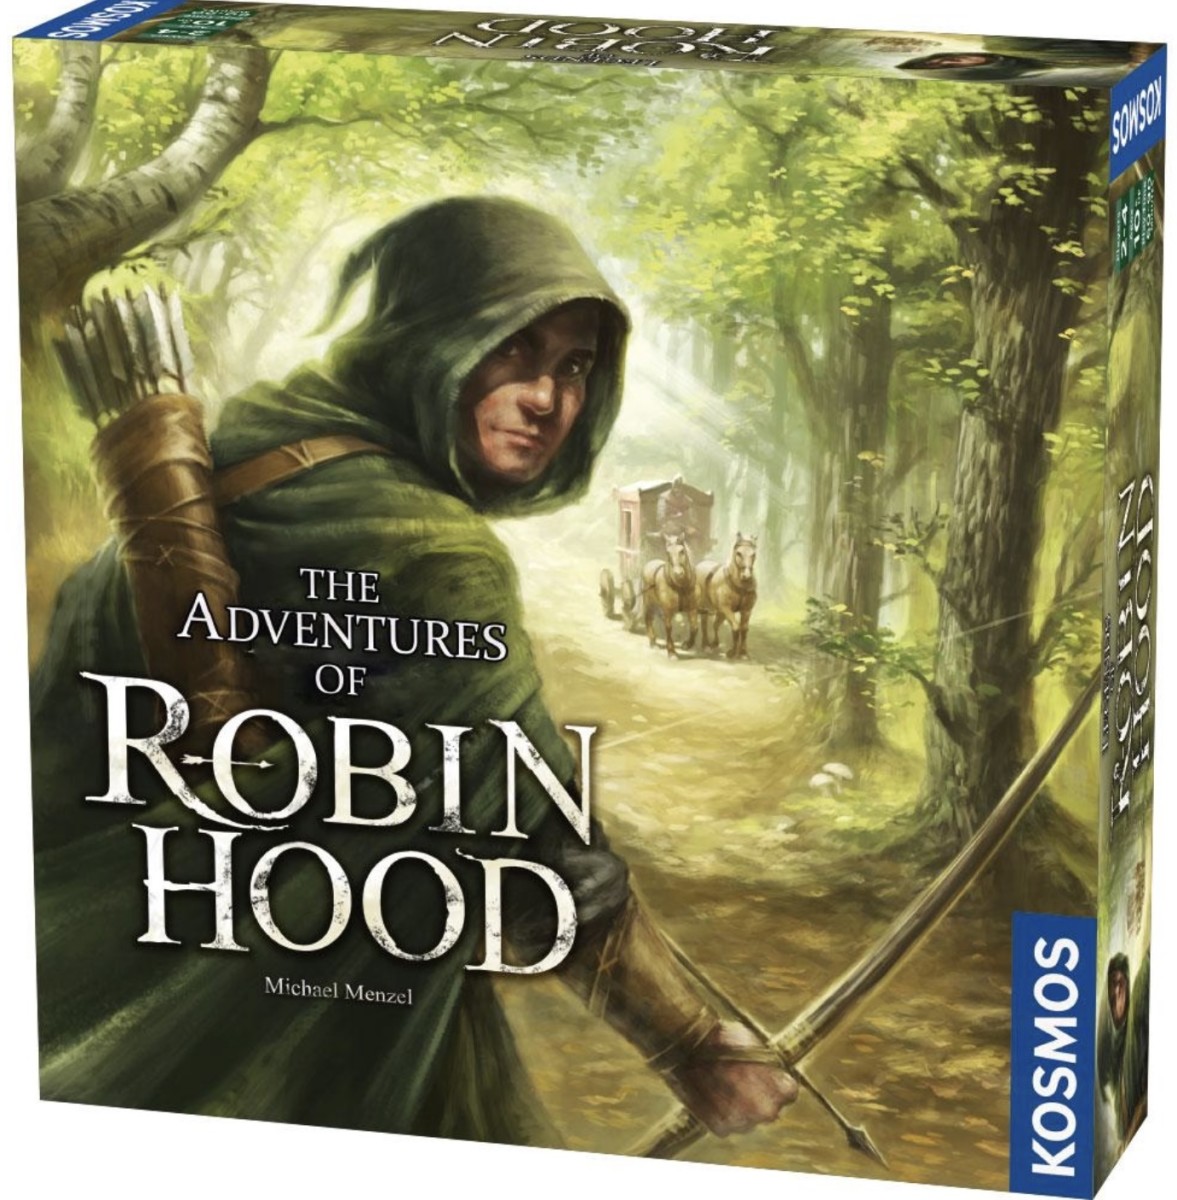 the-adventures-of-robin-hood-and-anno-1800-are-both-intriguing-strategy-board-games